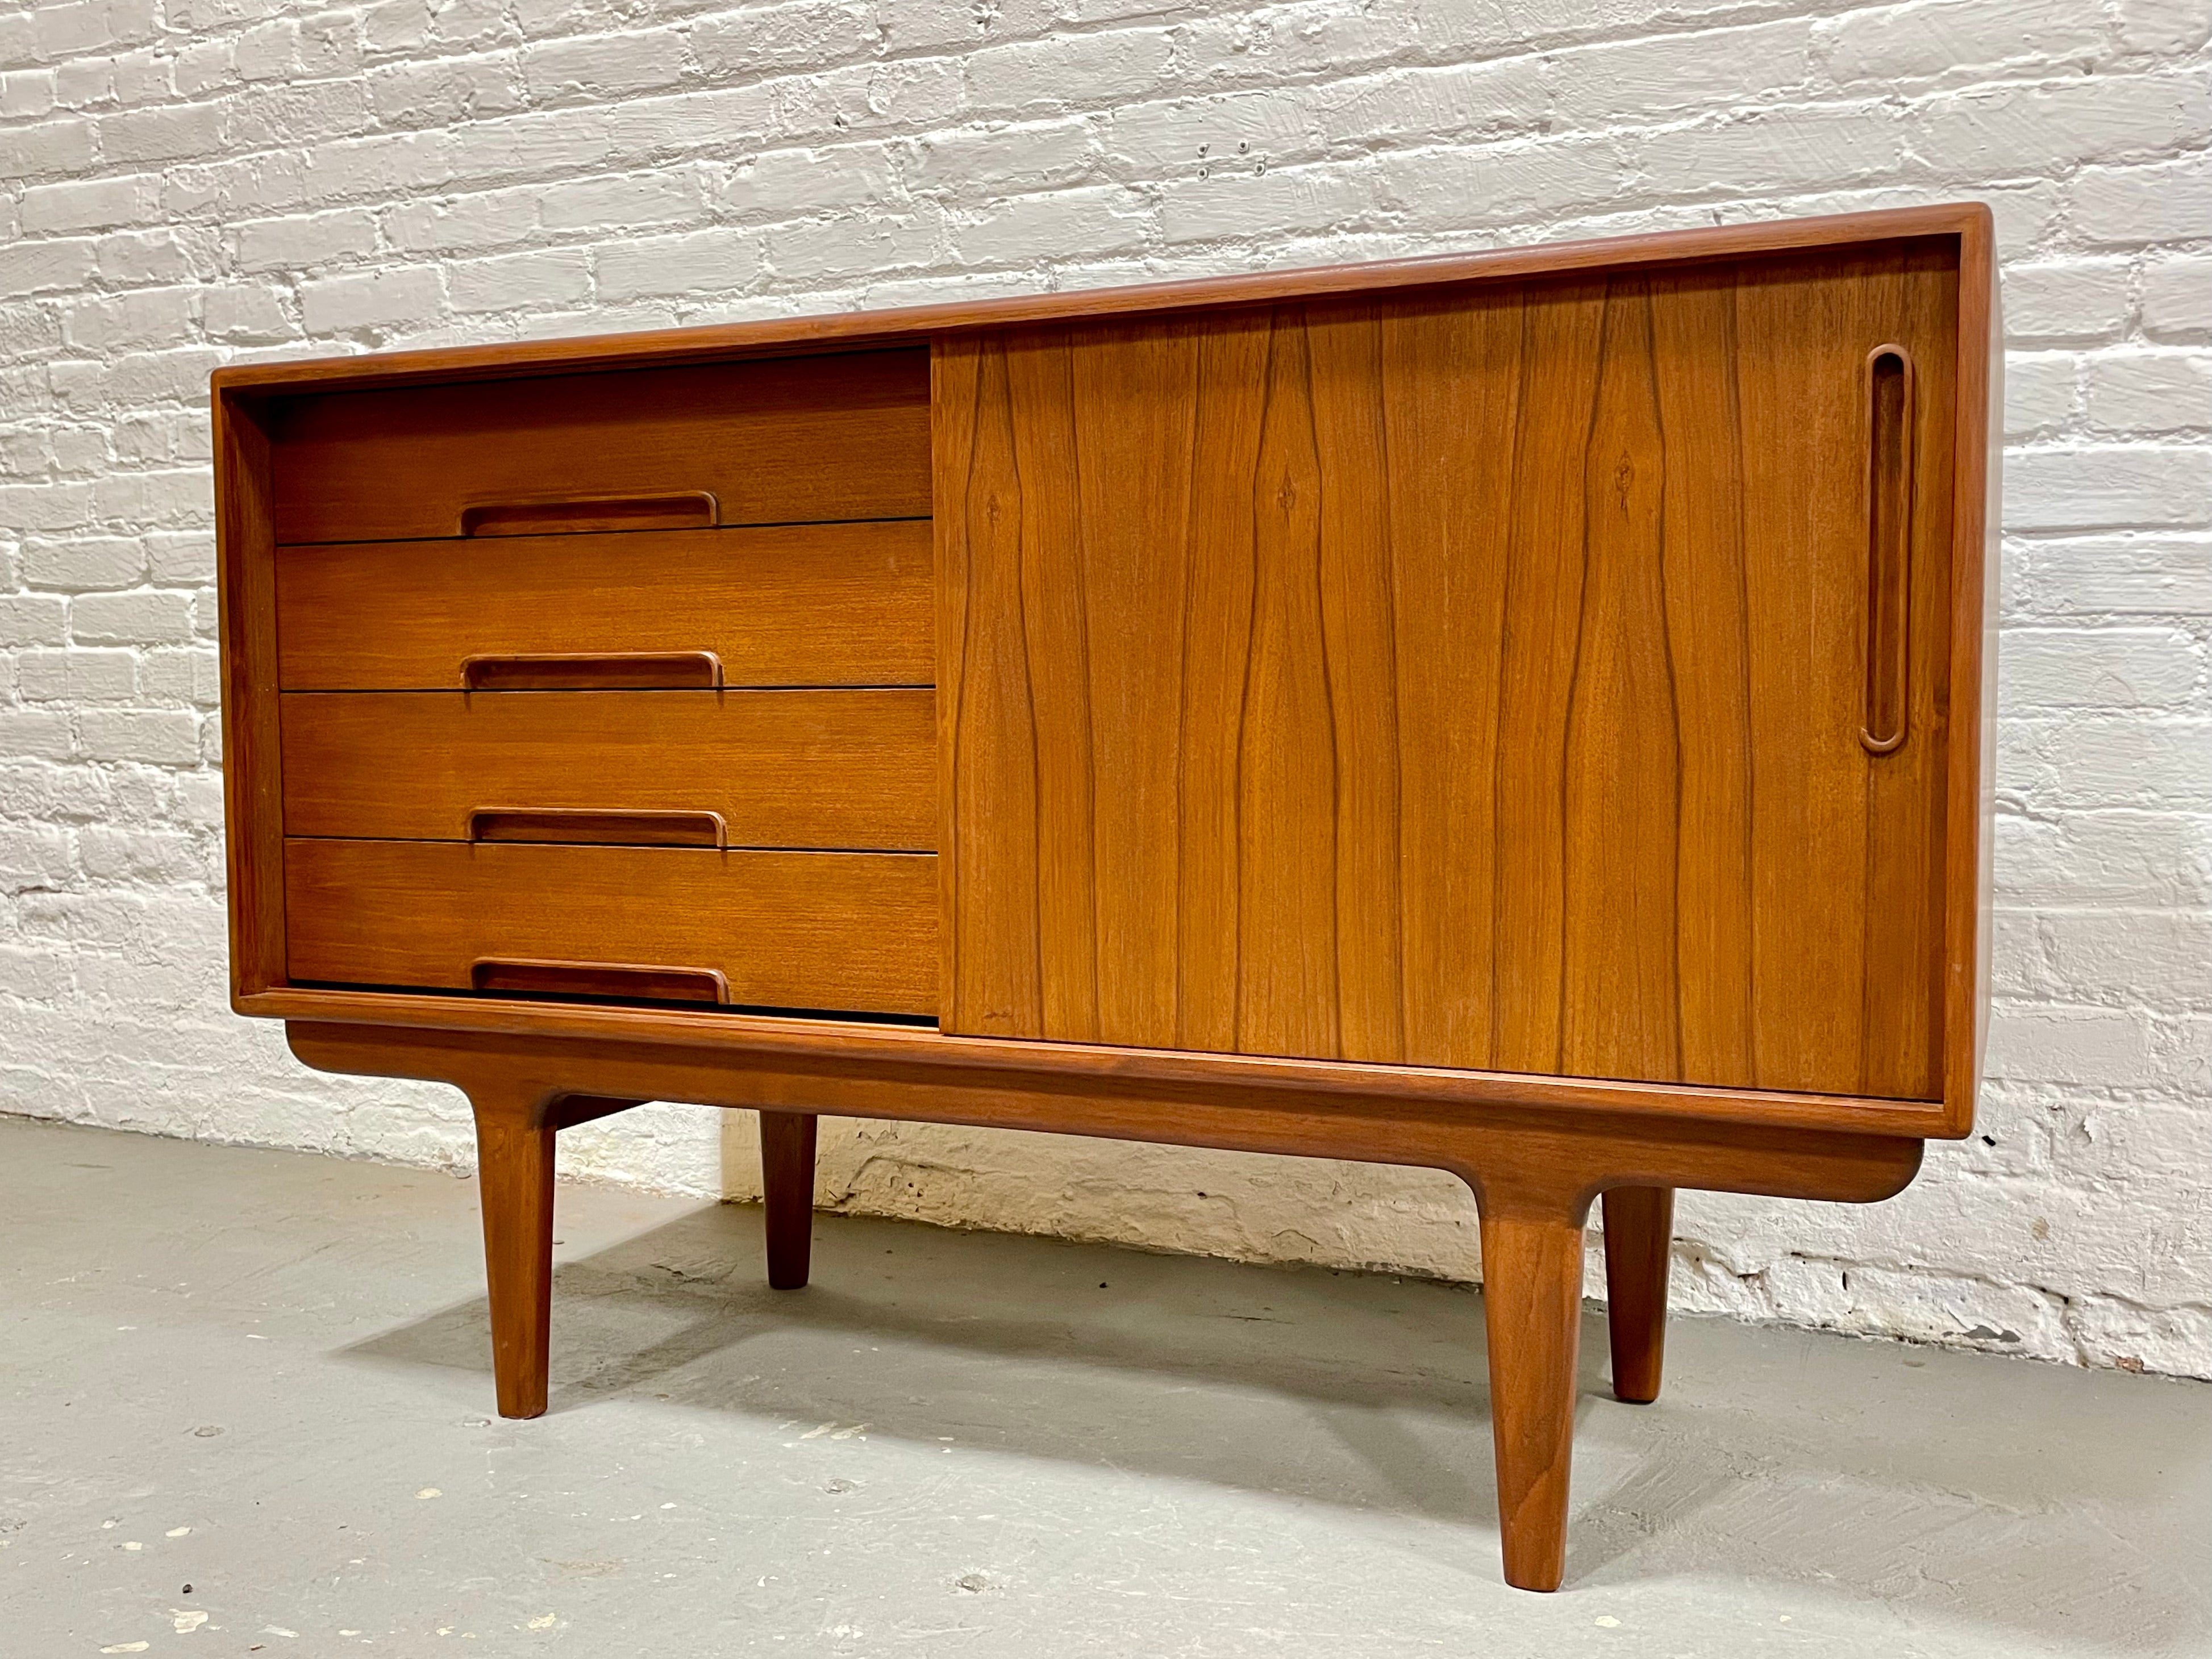 Apartment Sized DANISH Mid Century Modern styled CREDENZA / Media Stand / Sideboard